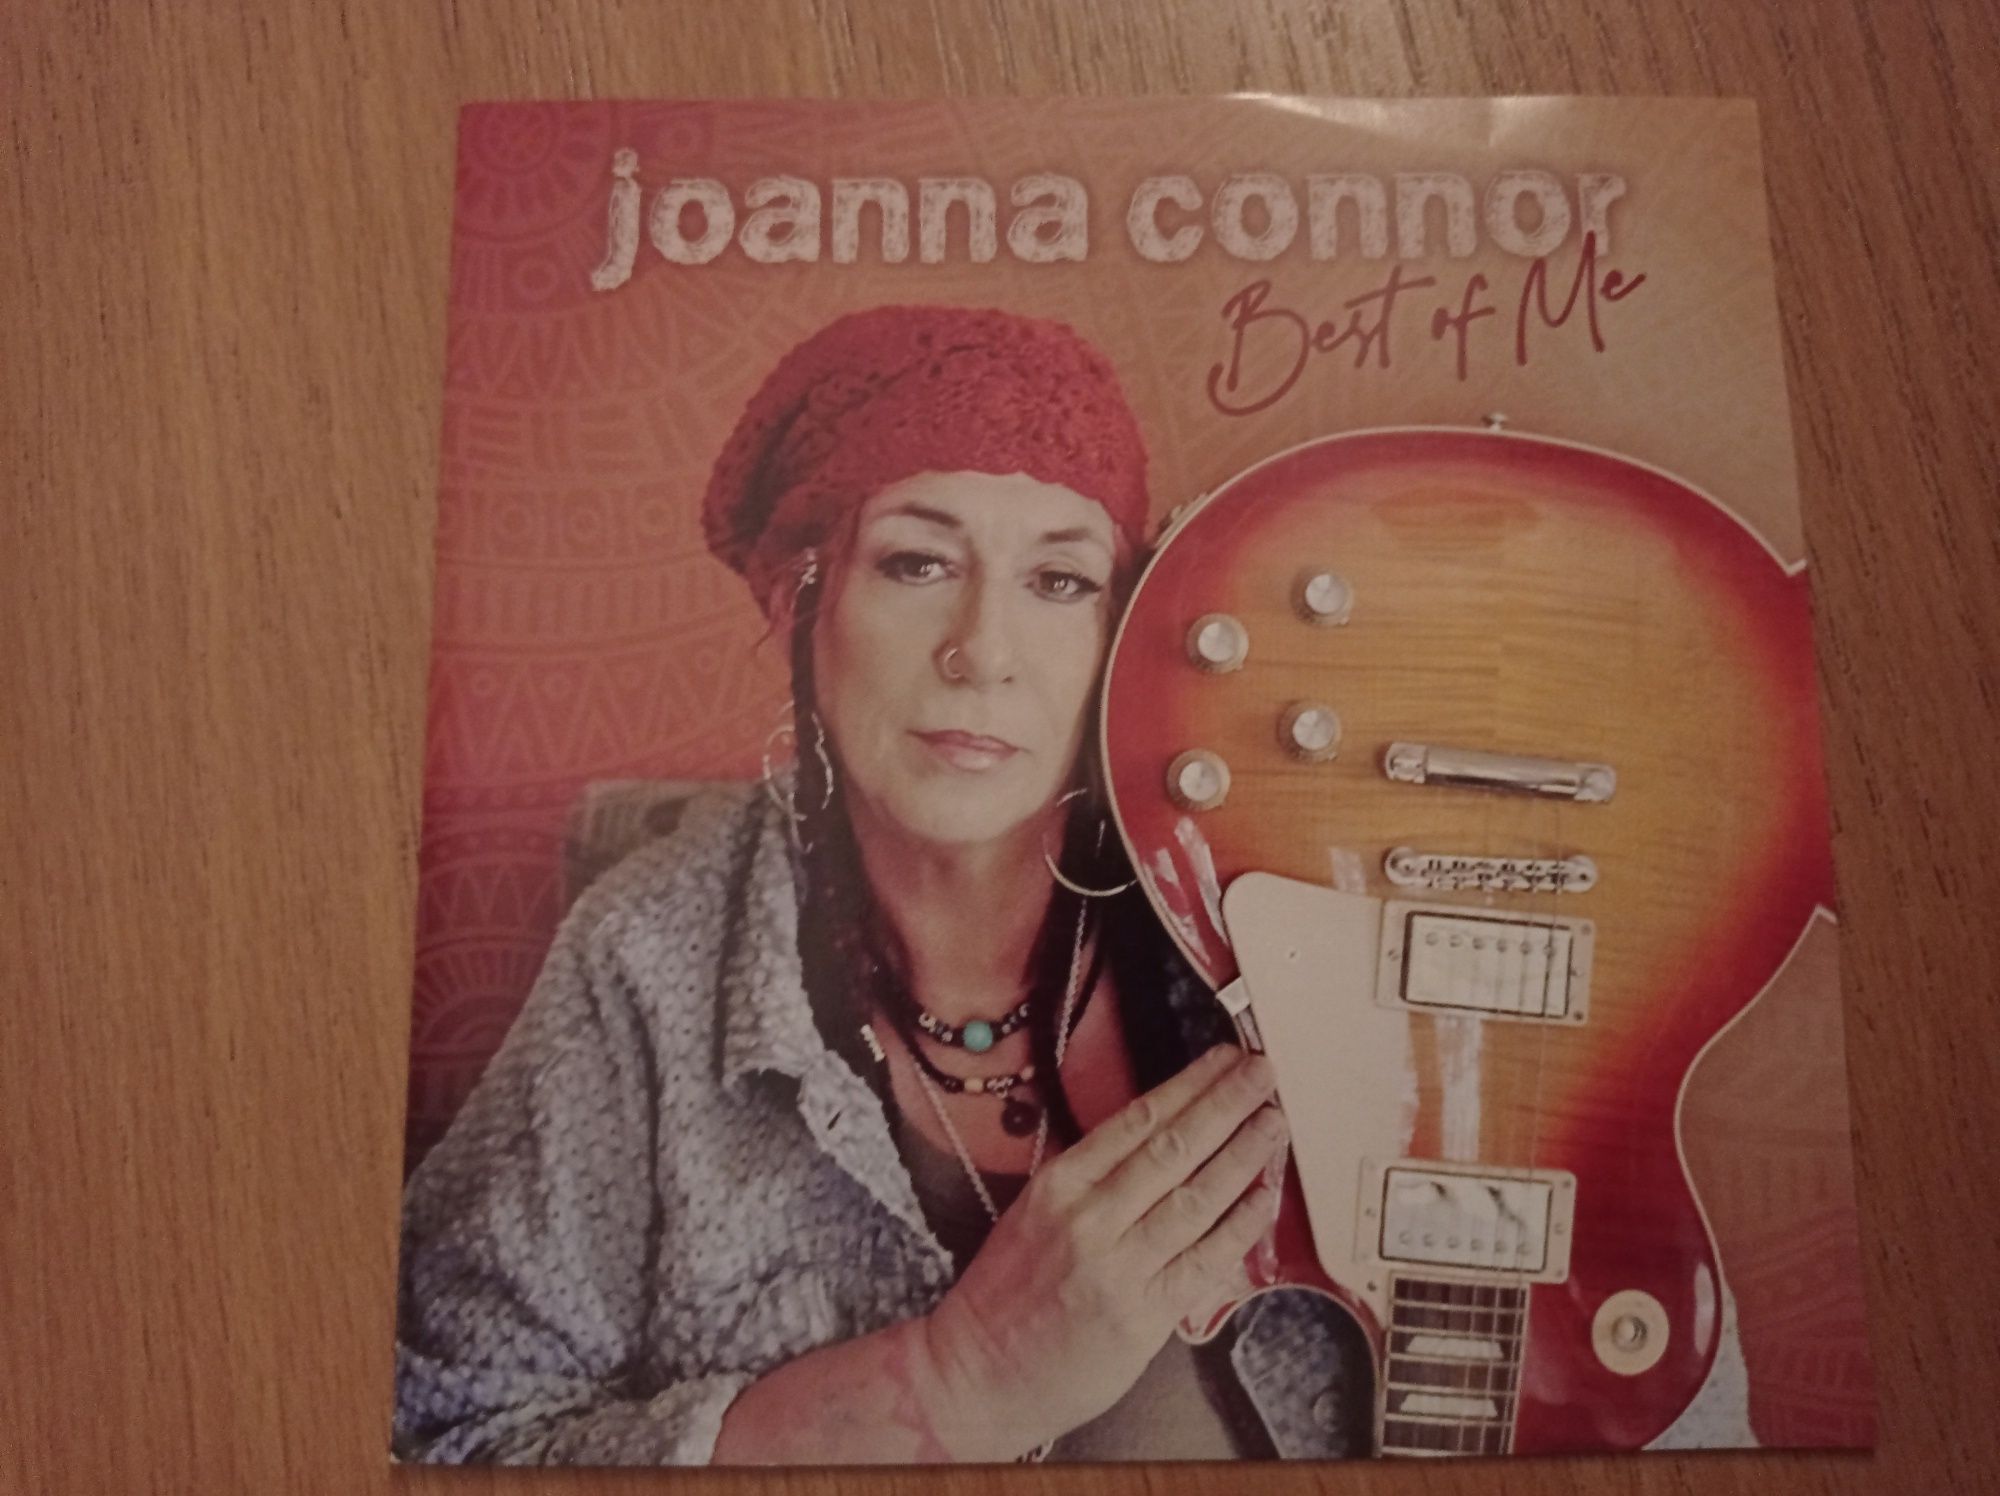 Joanna Connor - Best of me